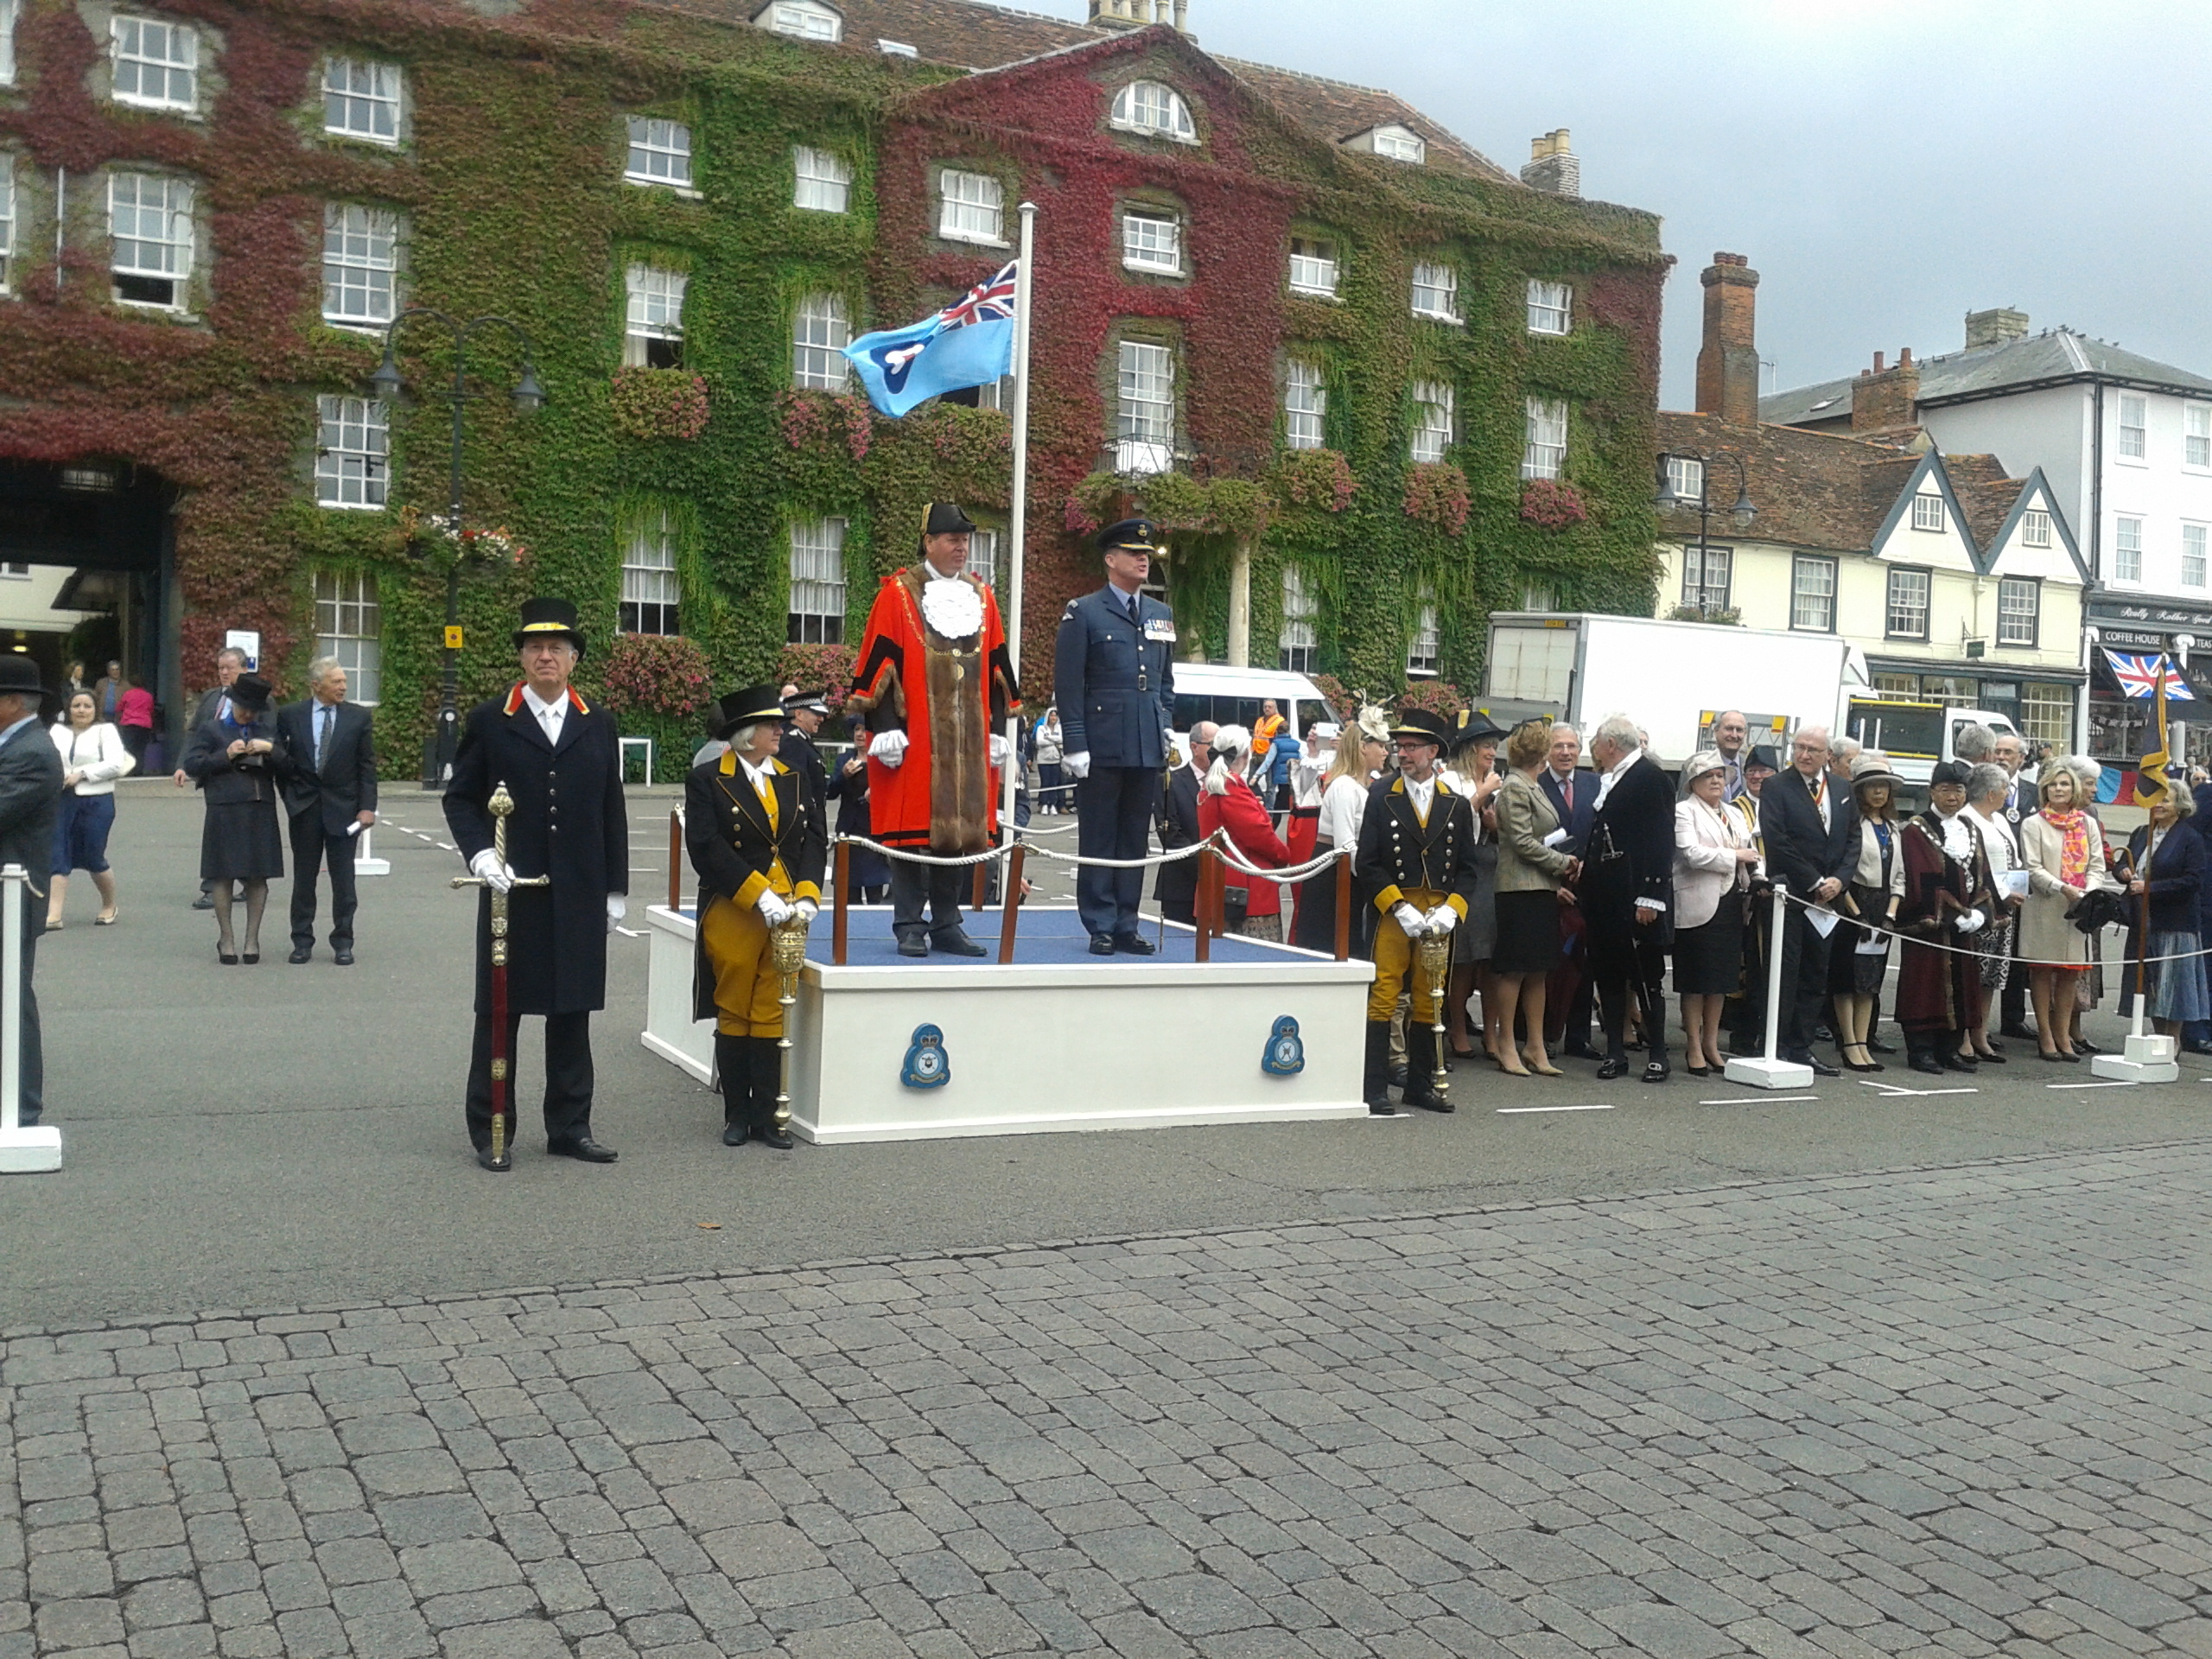 Councillor Everitt (on left of the podium) during Battle of Britain celebrations in Bury St Edmunds.